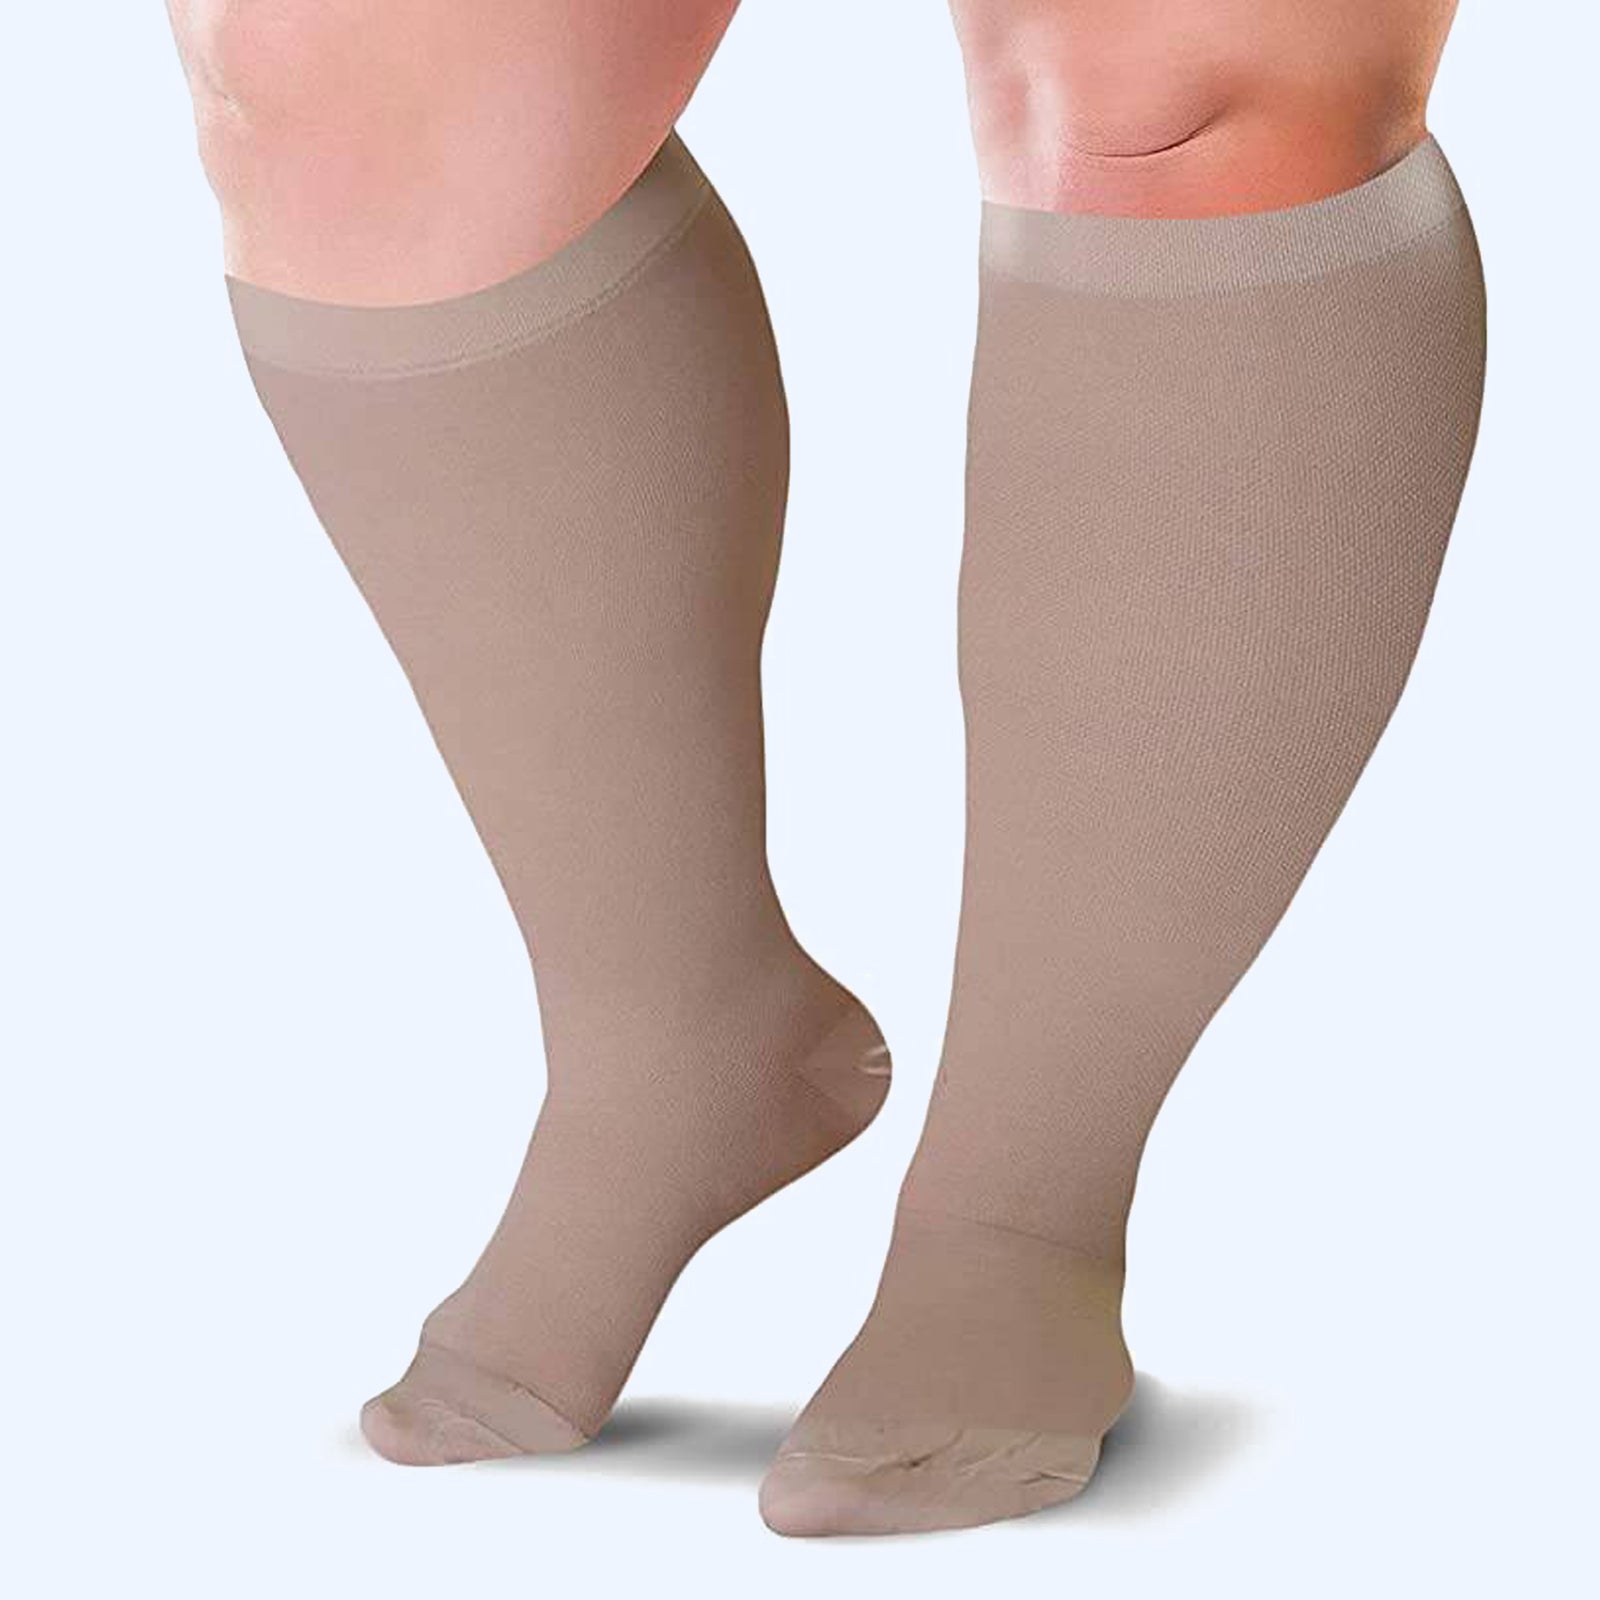 Plus Size Compression Socks for Women Men 20-30 mmHg 2xl 3xl 4xl , Wide  Calf High Tights Long SocksStockings Best Support for Circulation, Running